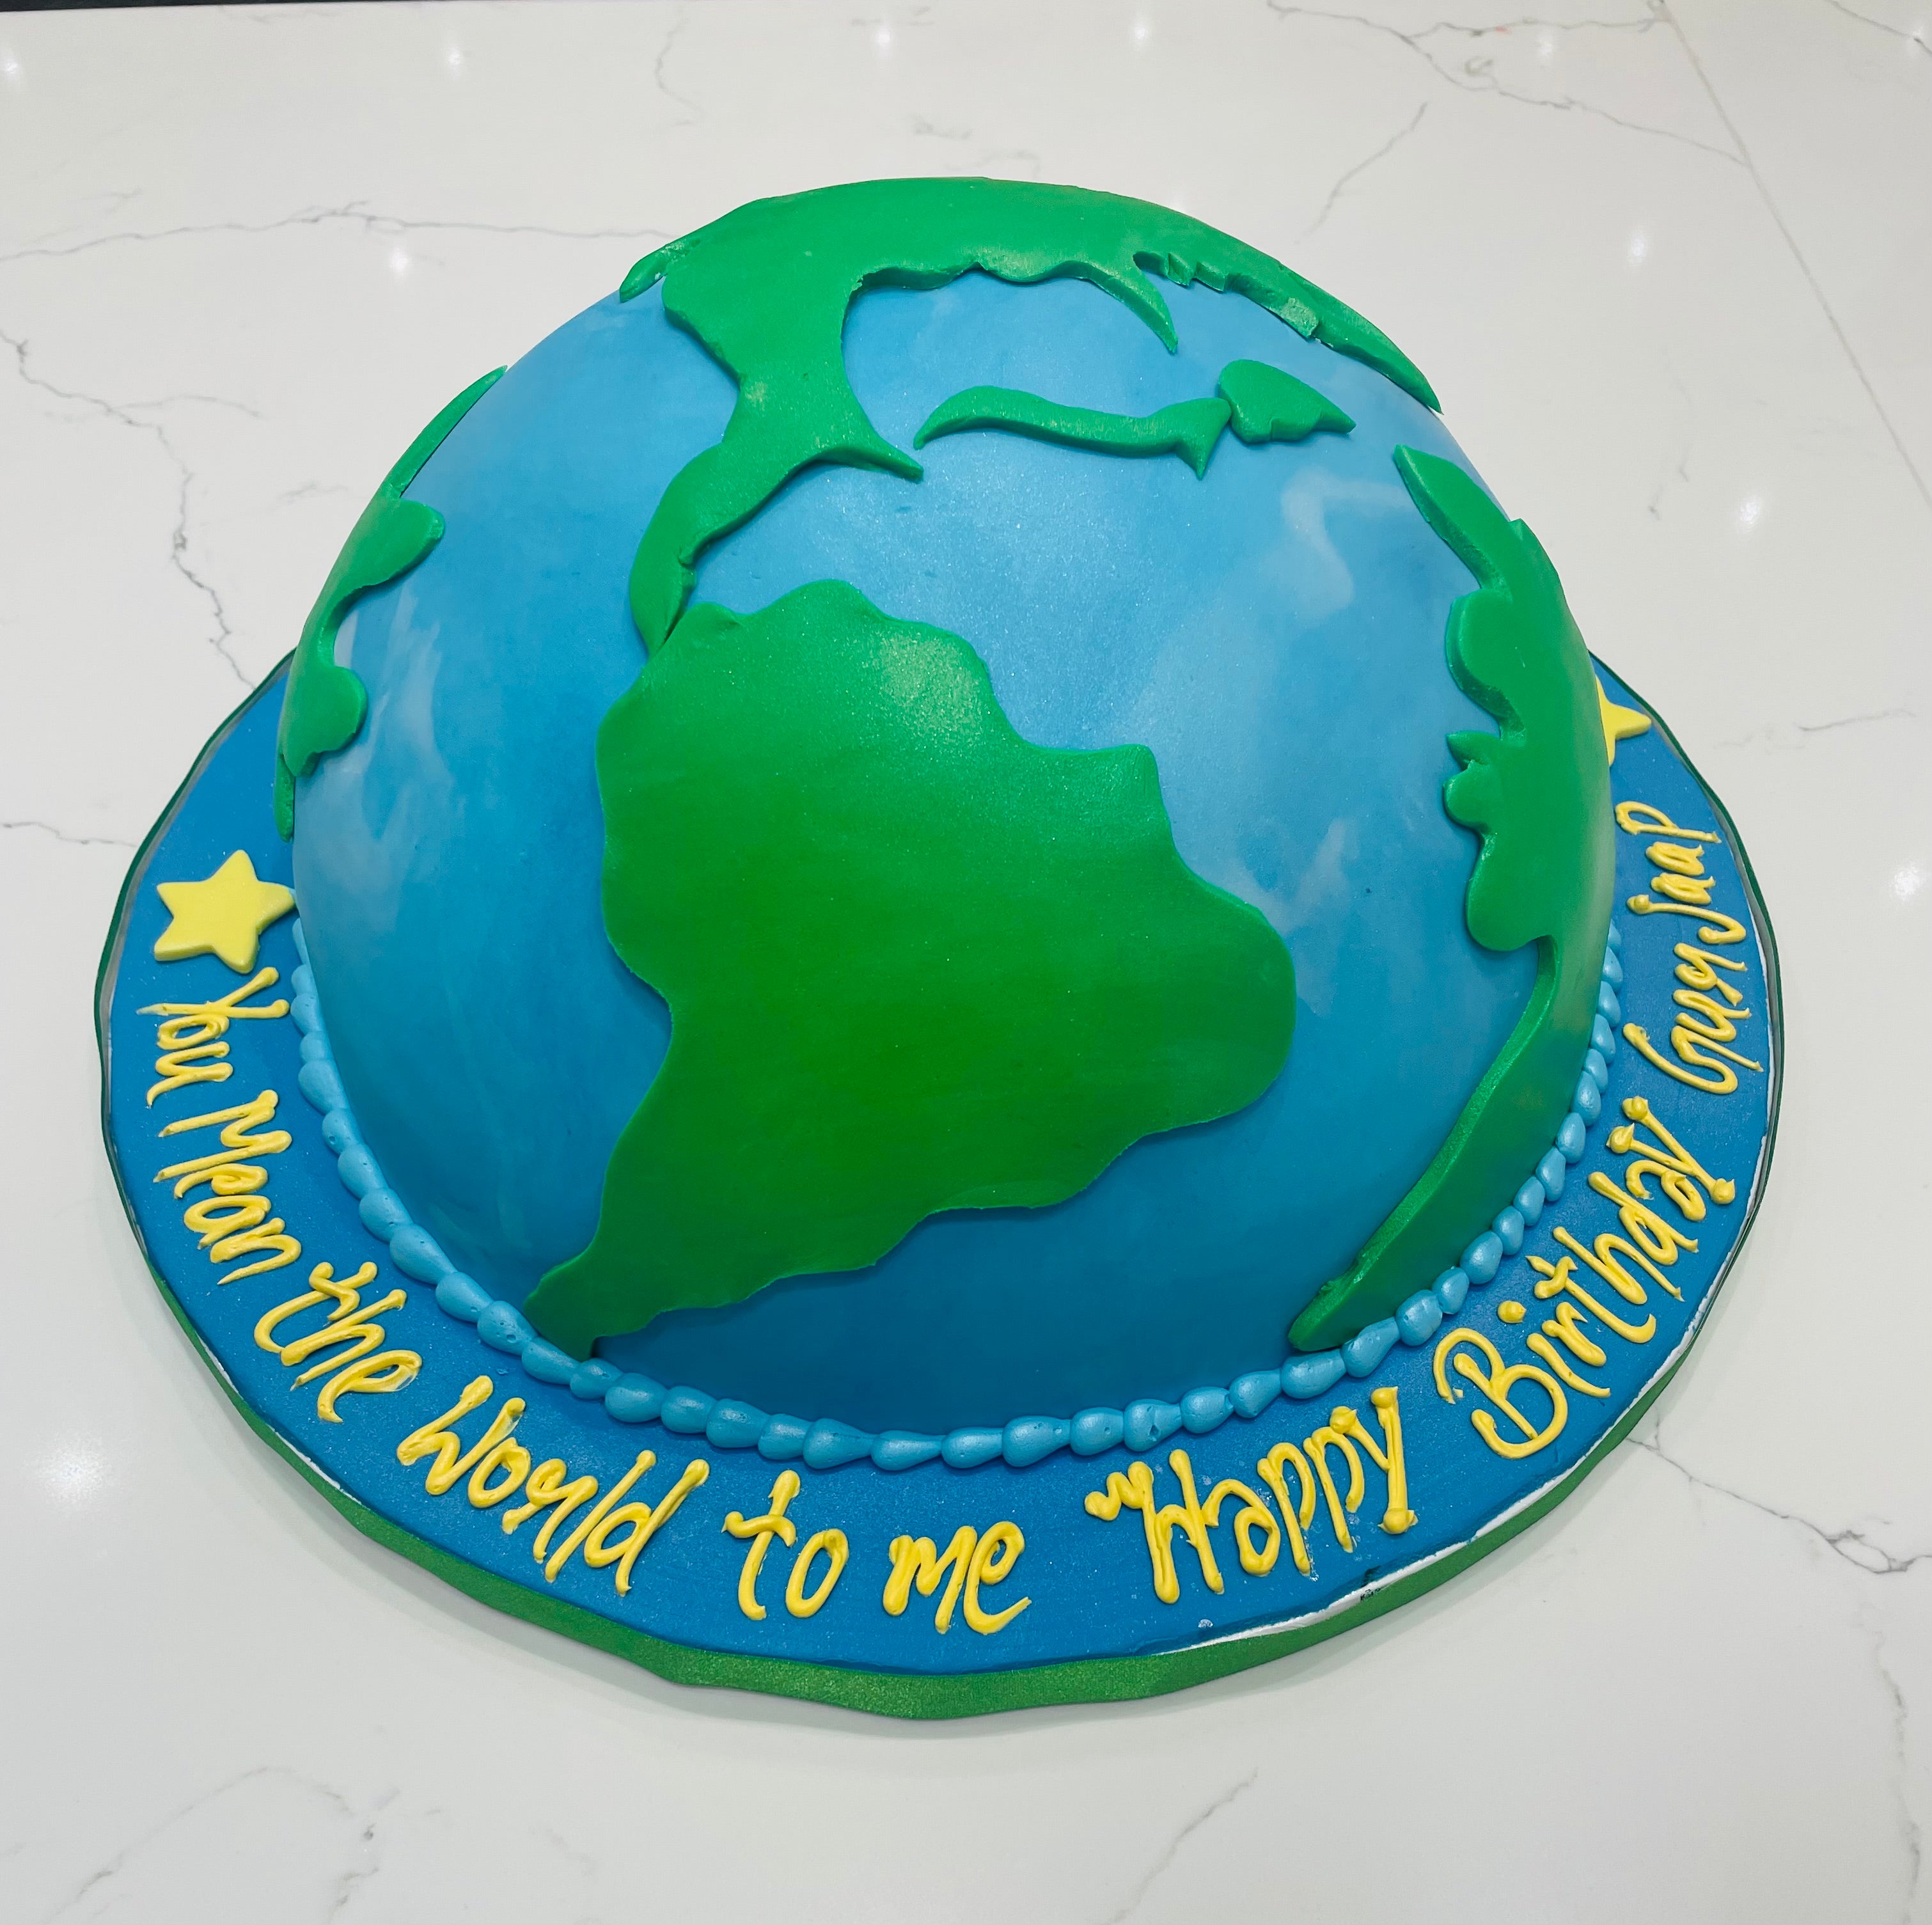 Coolest Earth Day Cake Decorating Ideas - family holiday.net/guide to  family holidays on the internet